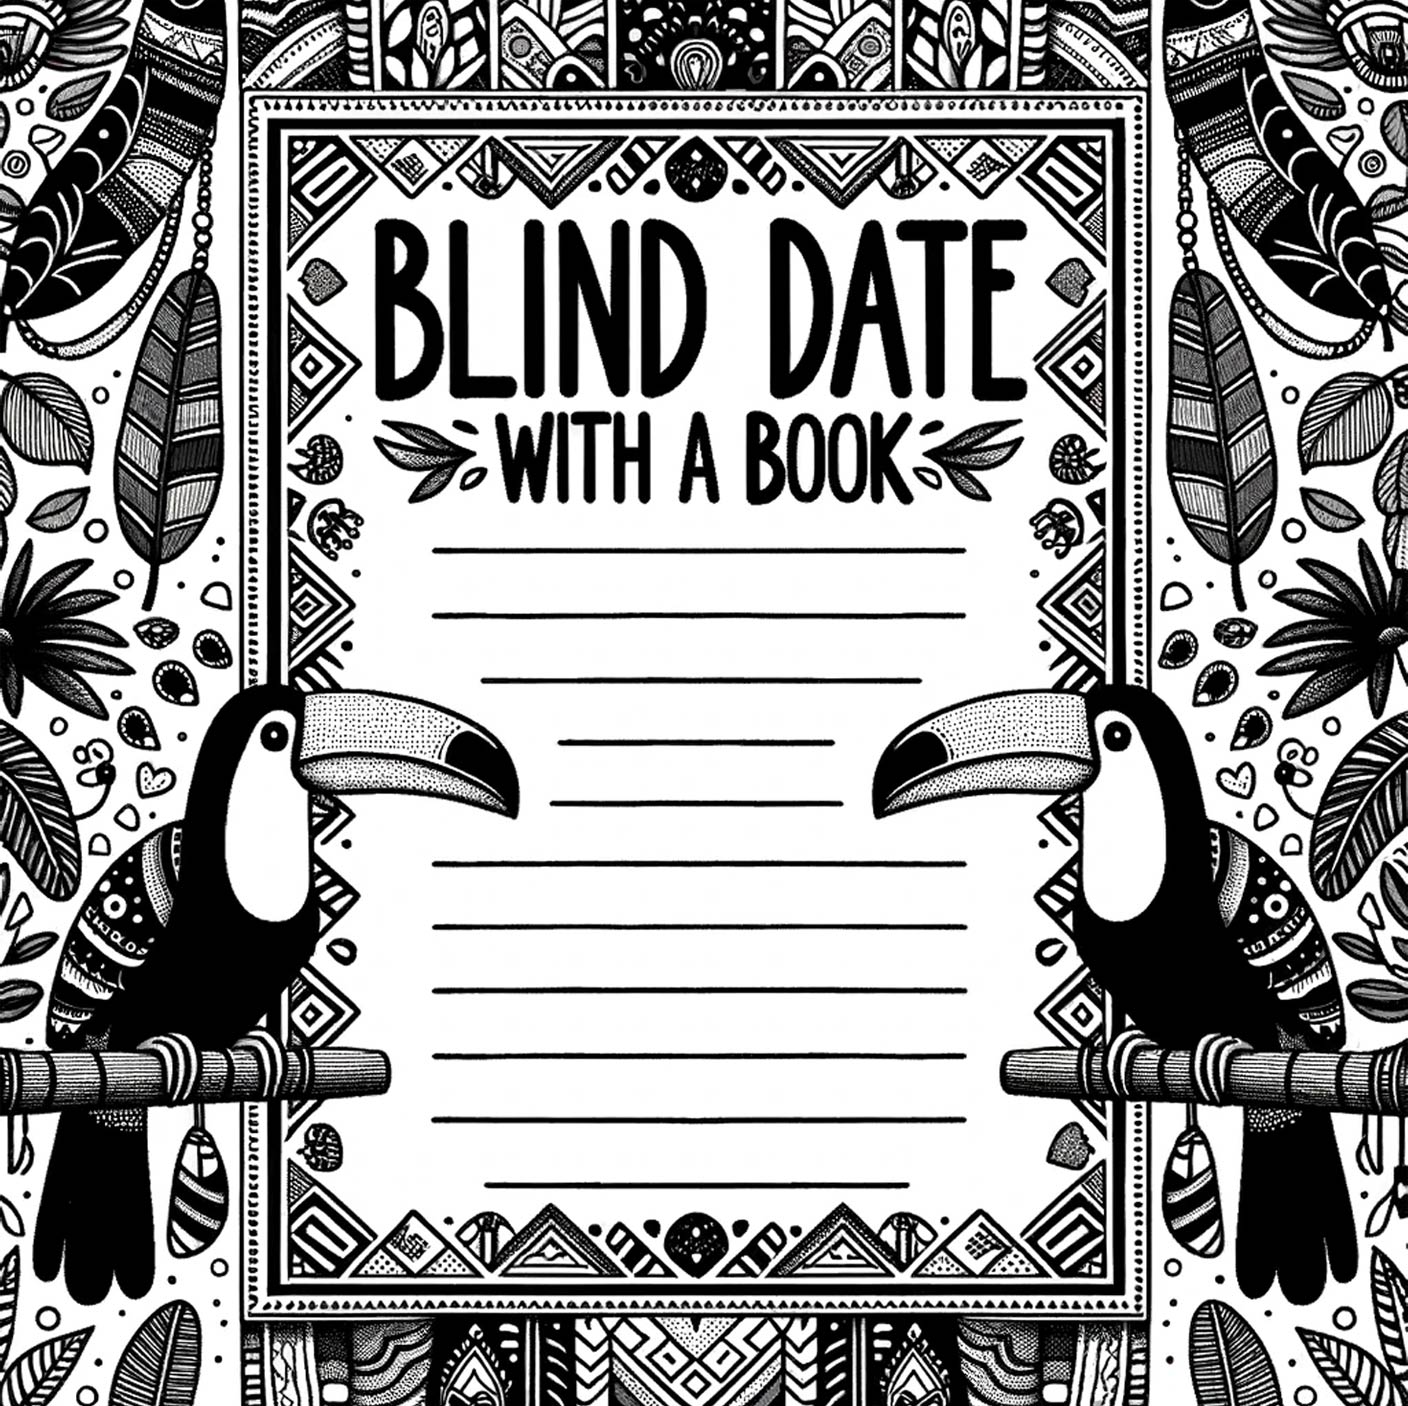 Blind Date With A Book Free Template - South American